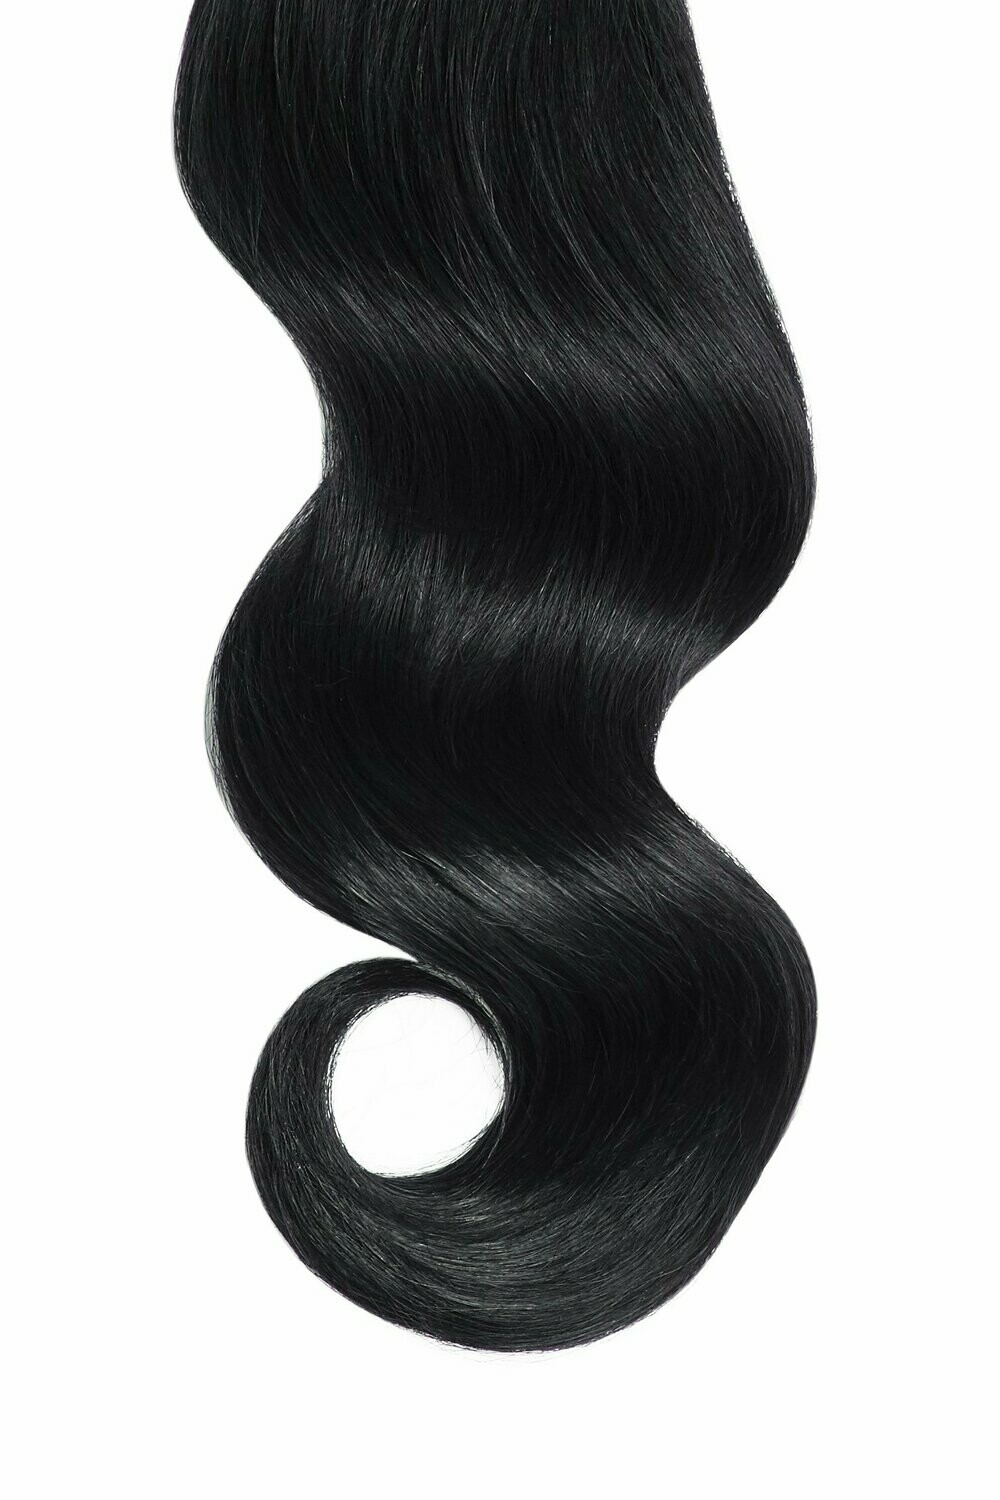 18″ MicroLink I-Tip Hair Extensions #1